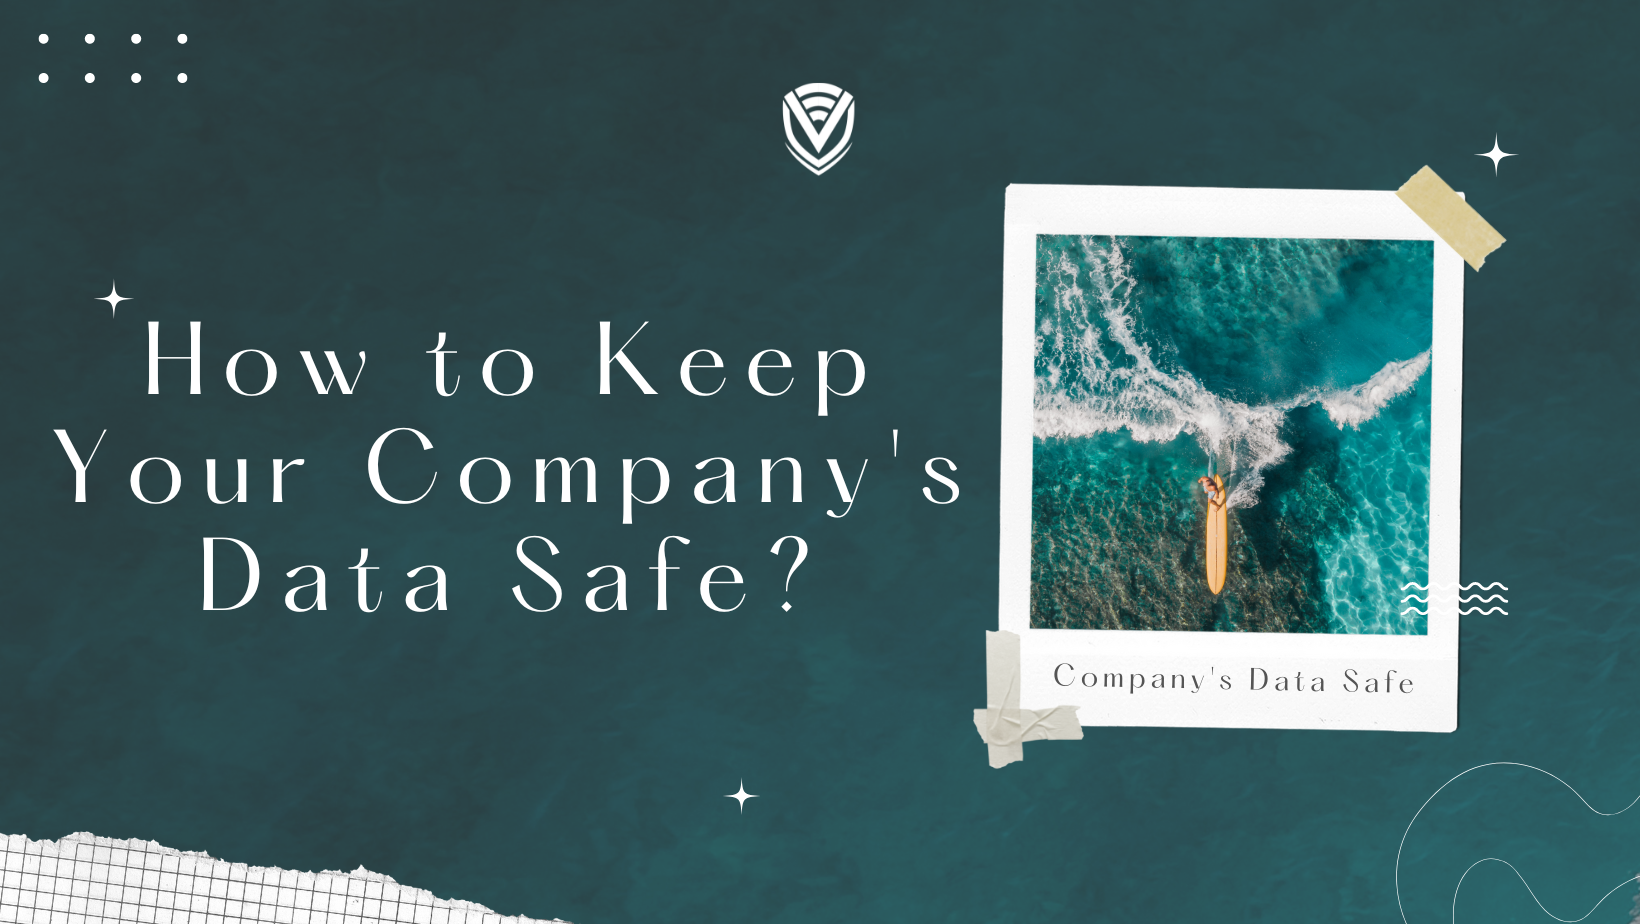 How to Keep Your Company's Data Safe?